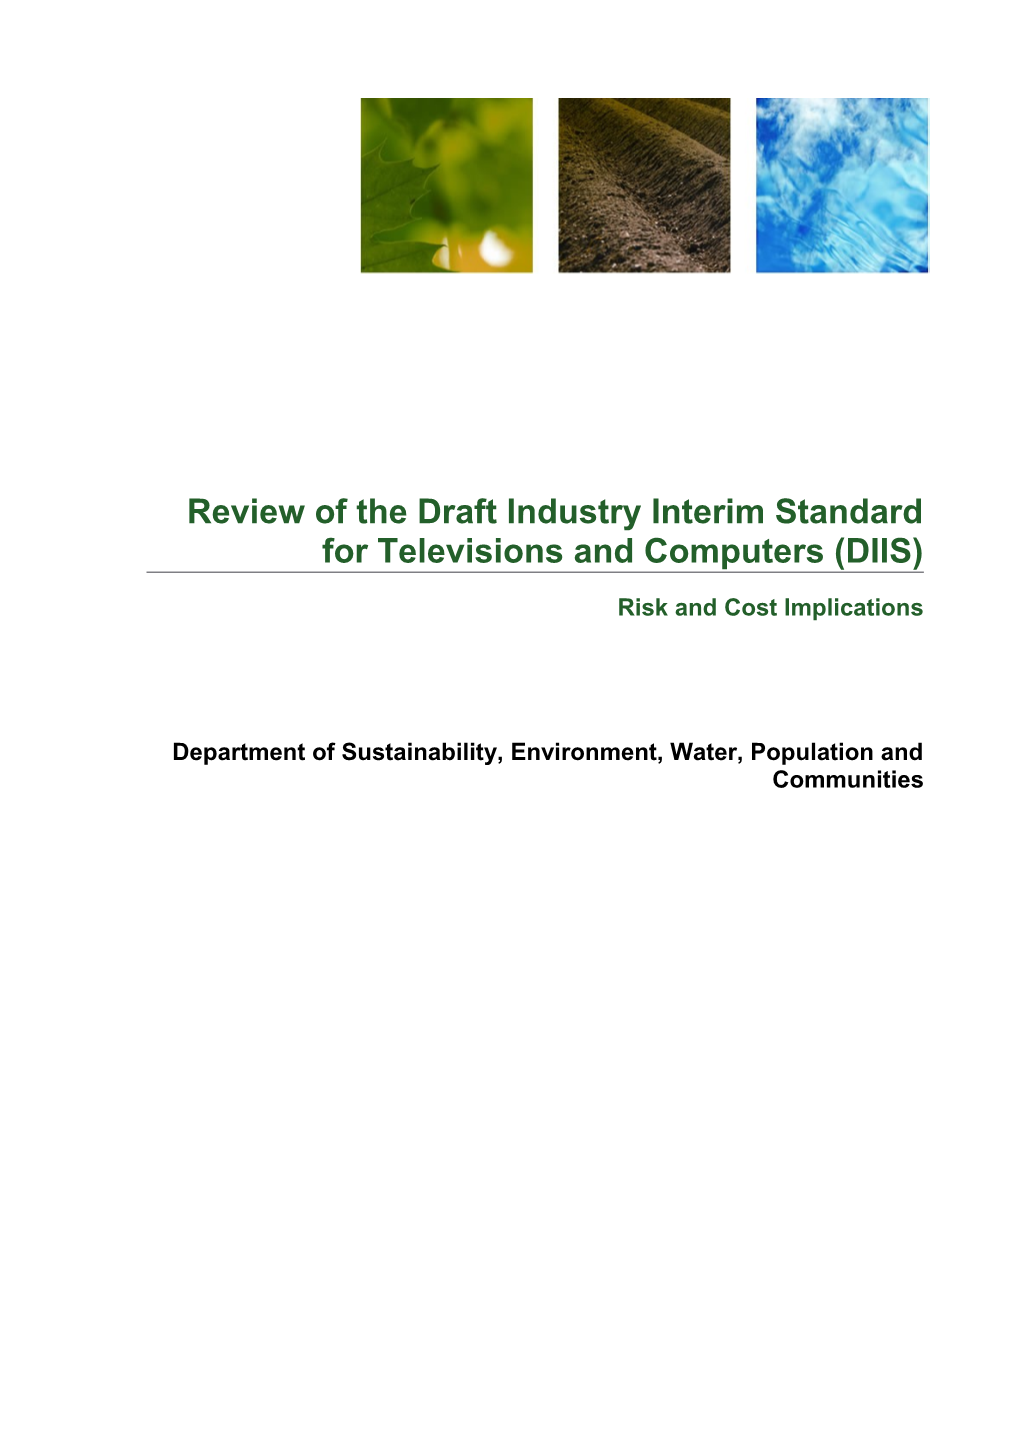 Review of Thedraft Industry Interim Standard for Televisions and Computers (DIIS)